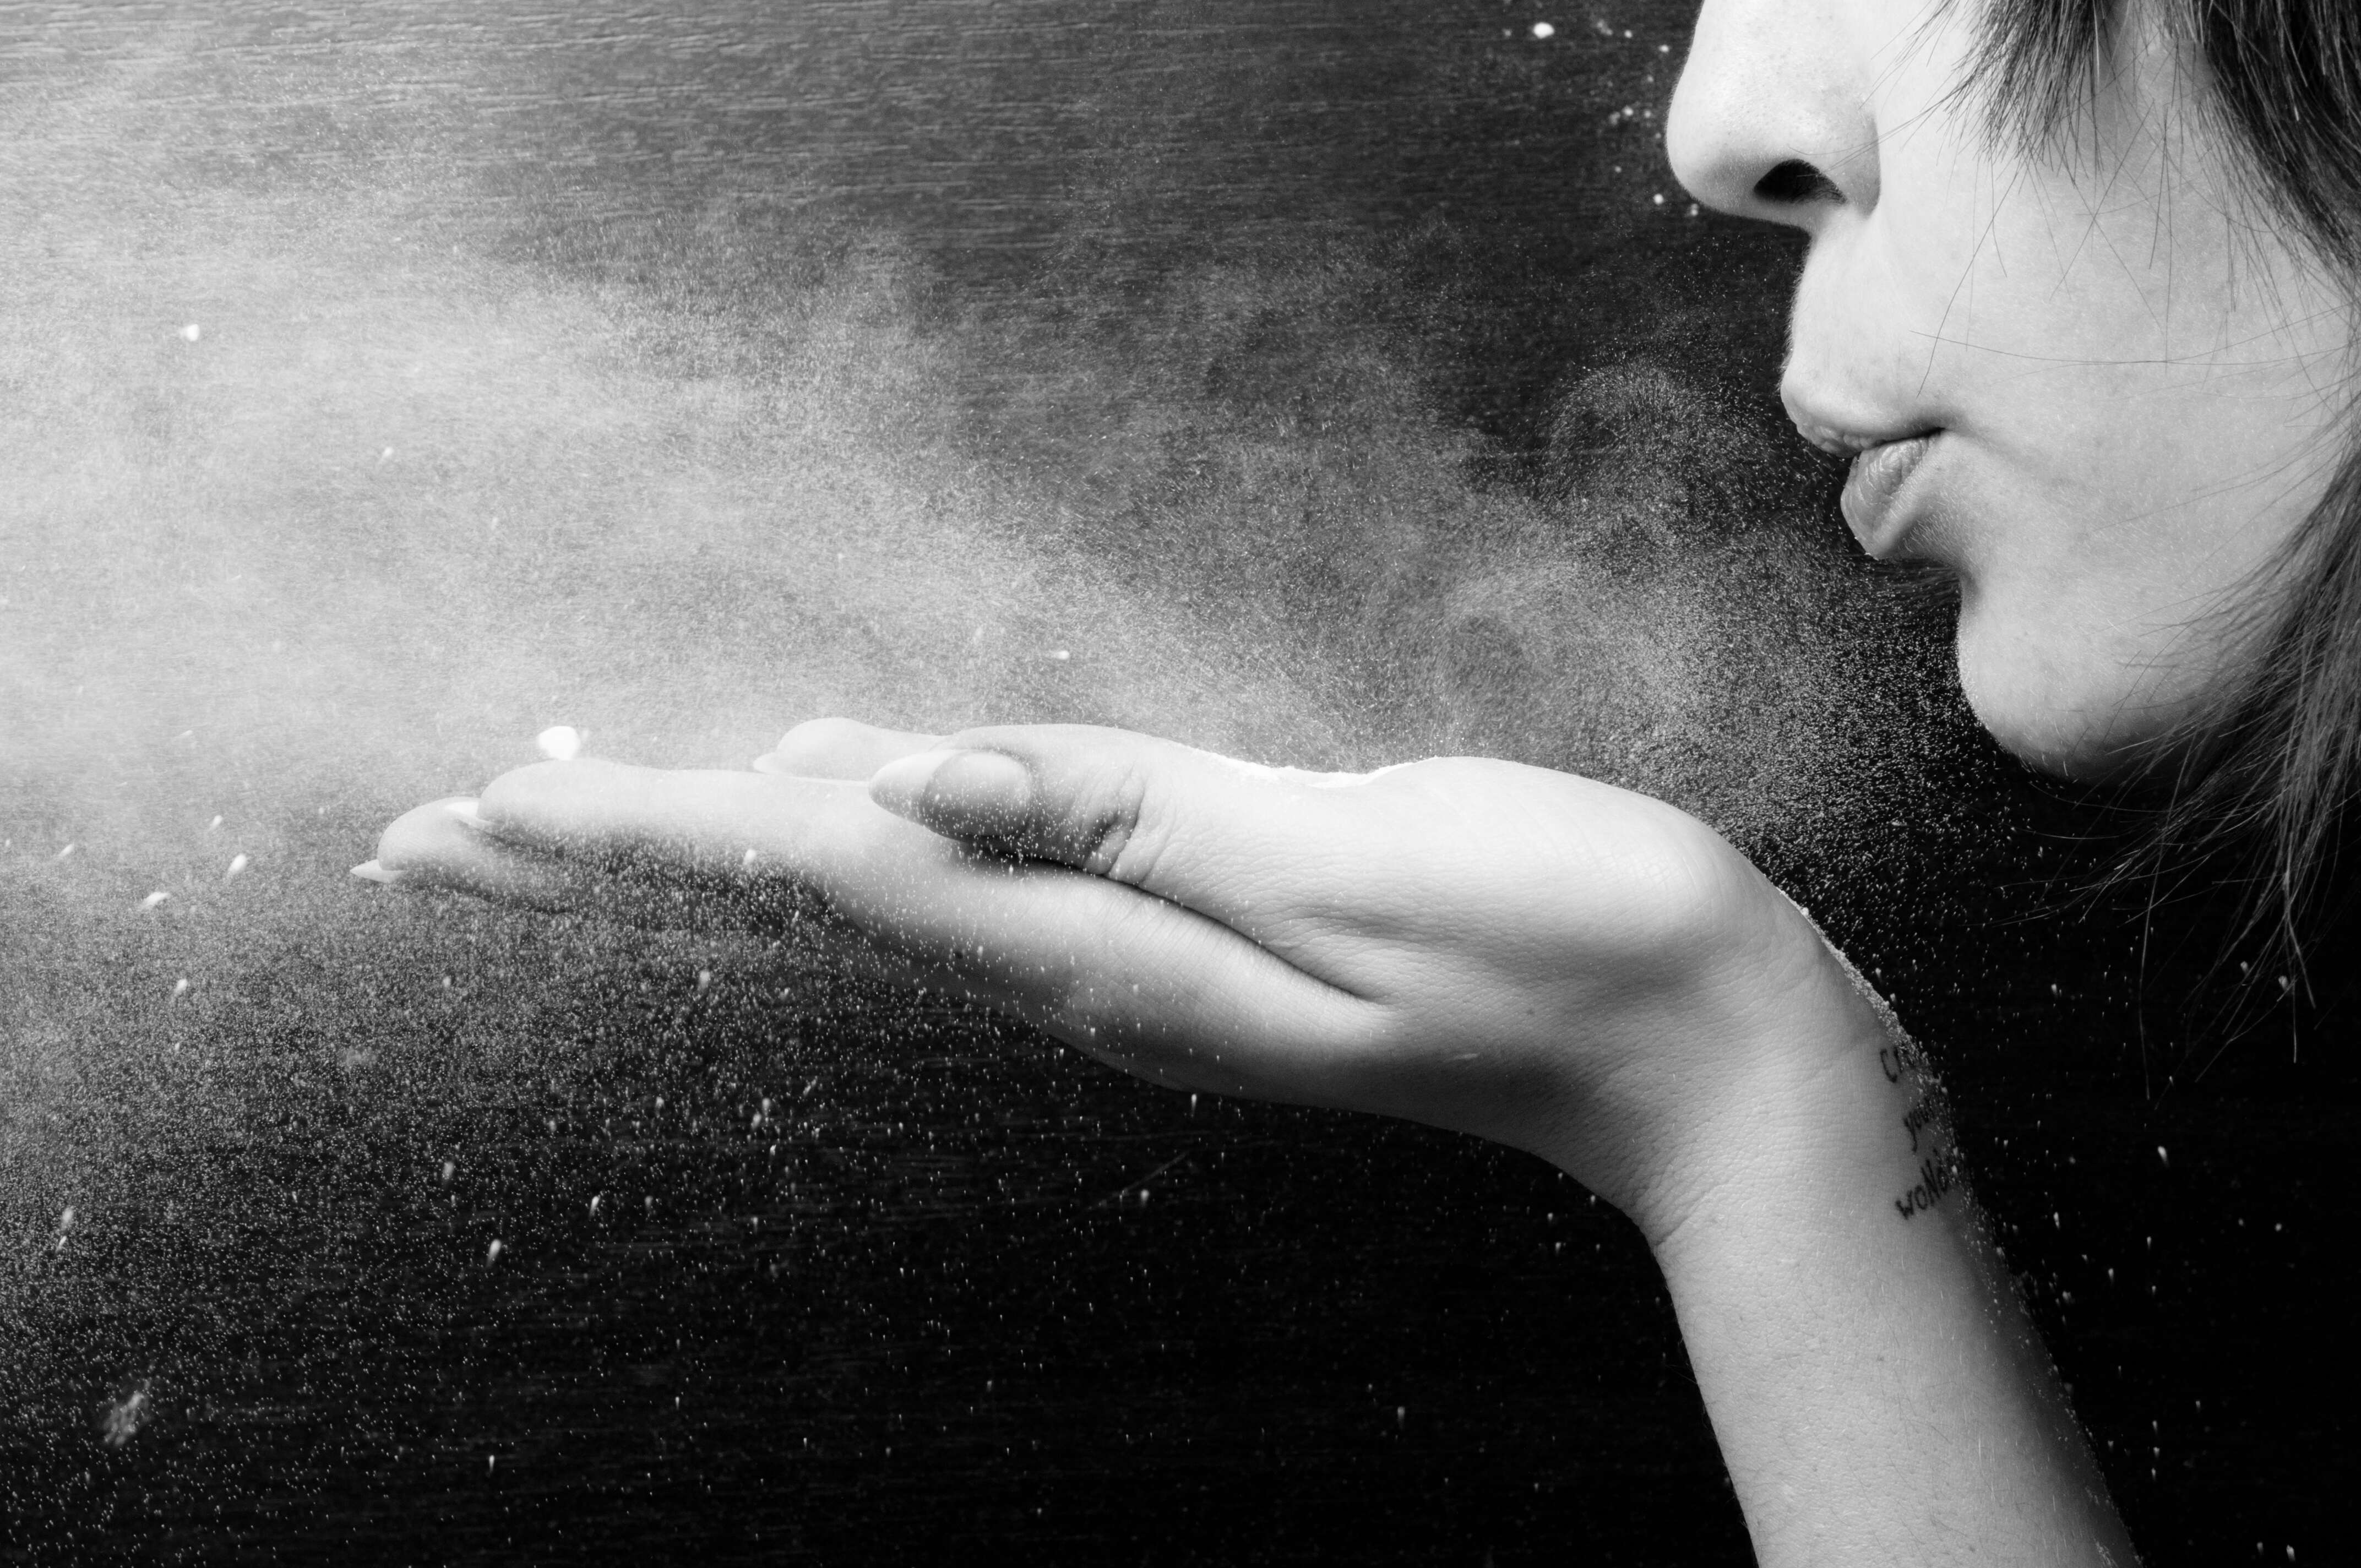 Photo of a woman blowing cinnamon powder into her home | Source: Shutterstock